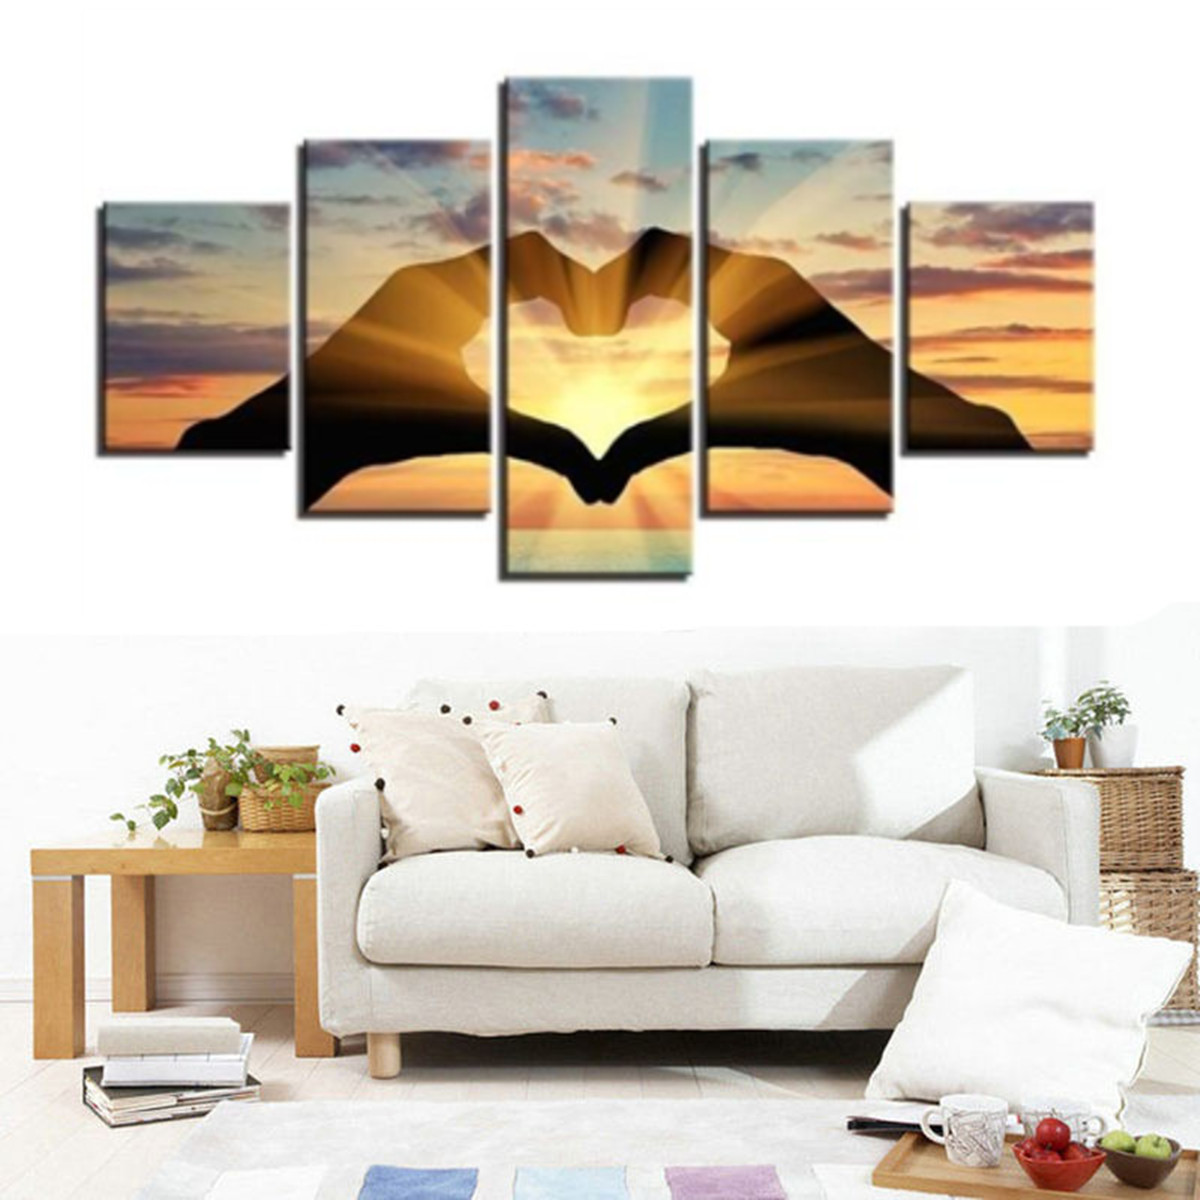 5-Pcs-Wall-Decorative-Painting-Couple-Love-Group-Wall-Decor-Art-Pictures-Canvas-Prints-Home-Office-H-1688799-4